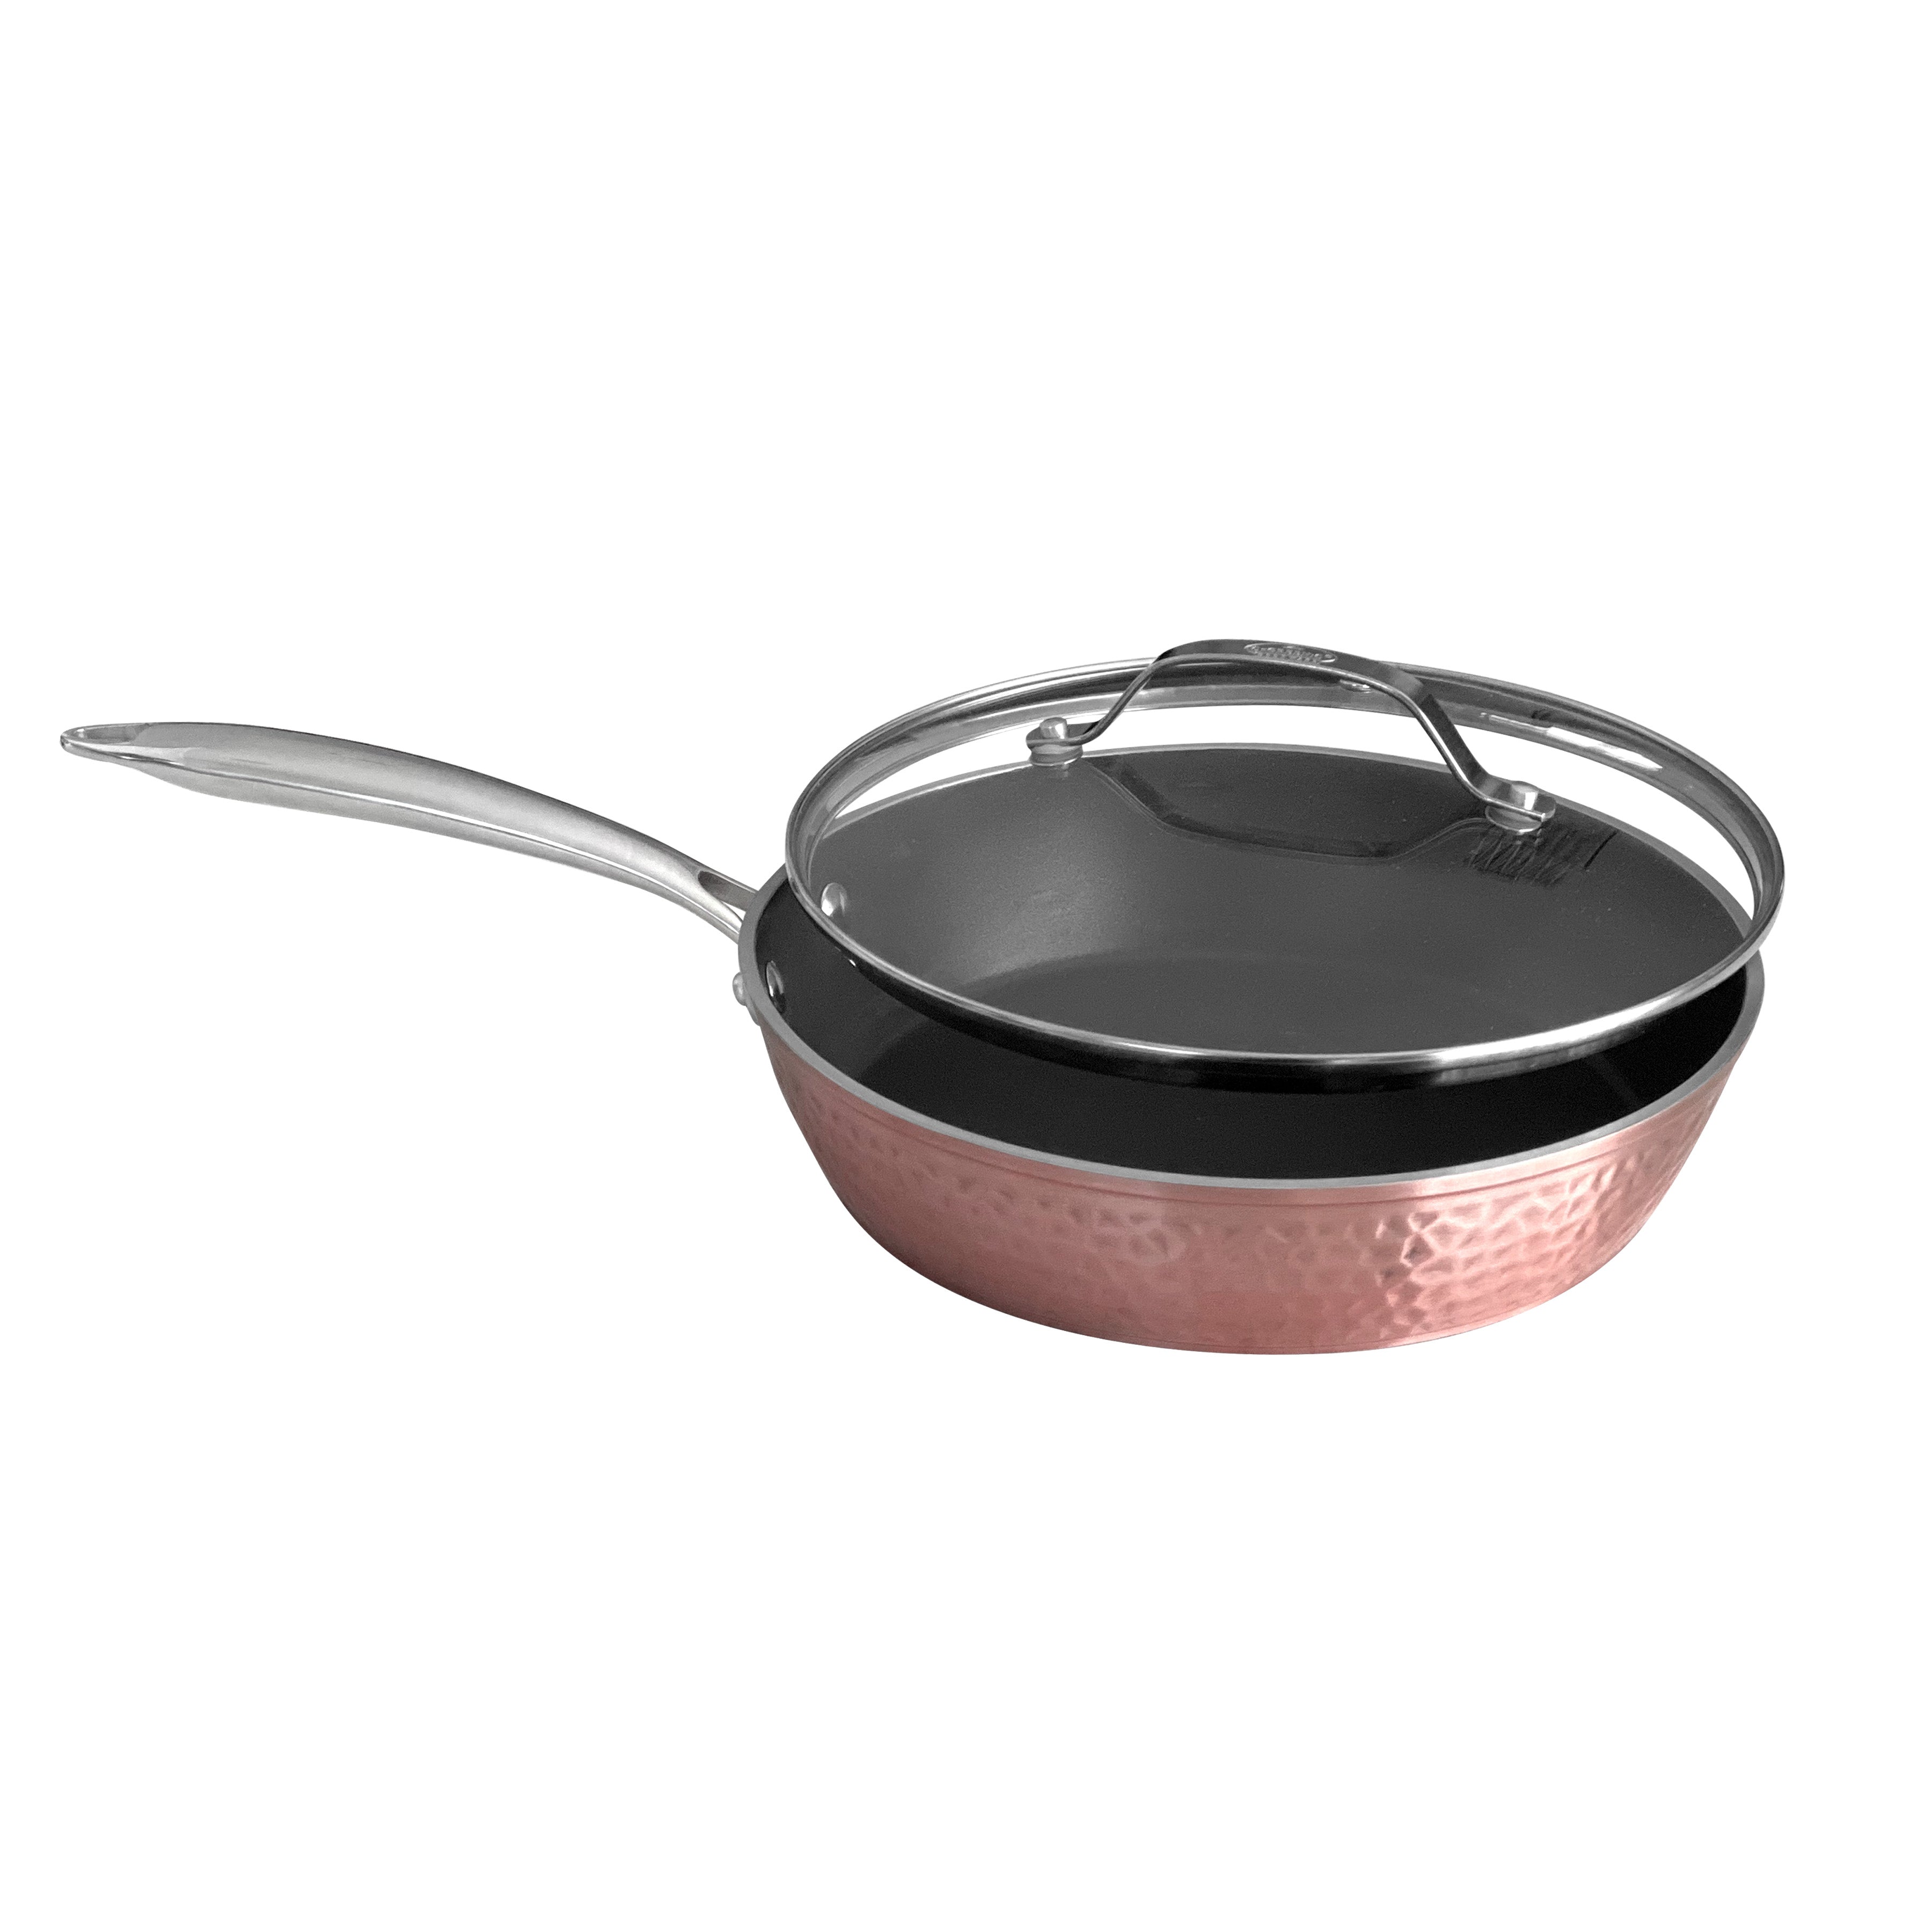 Hammered Rose Gold 14 Pan with Glass Lid – OrGreenic Cookware